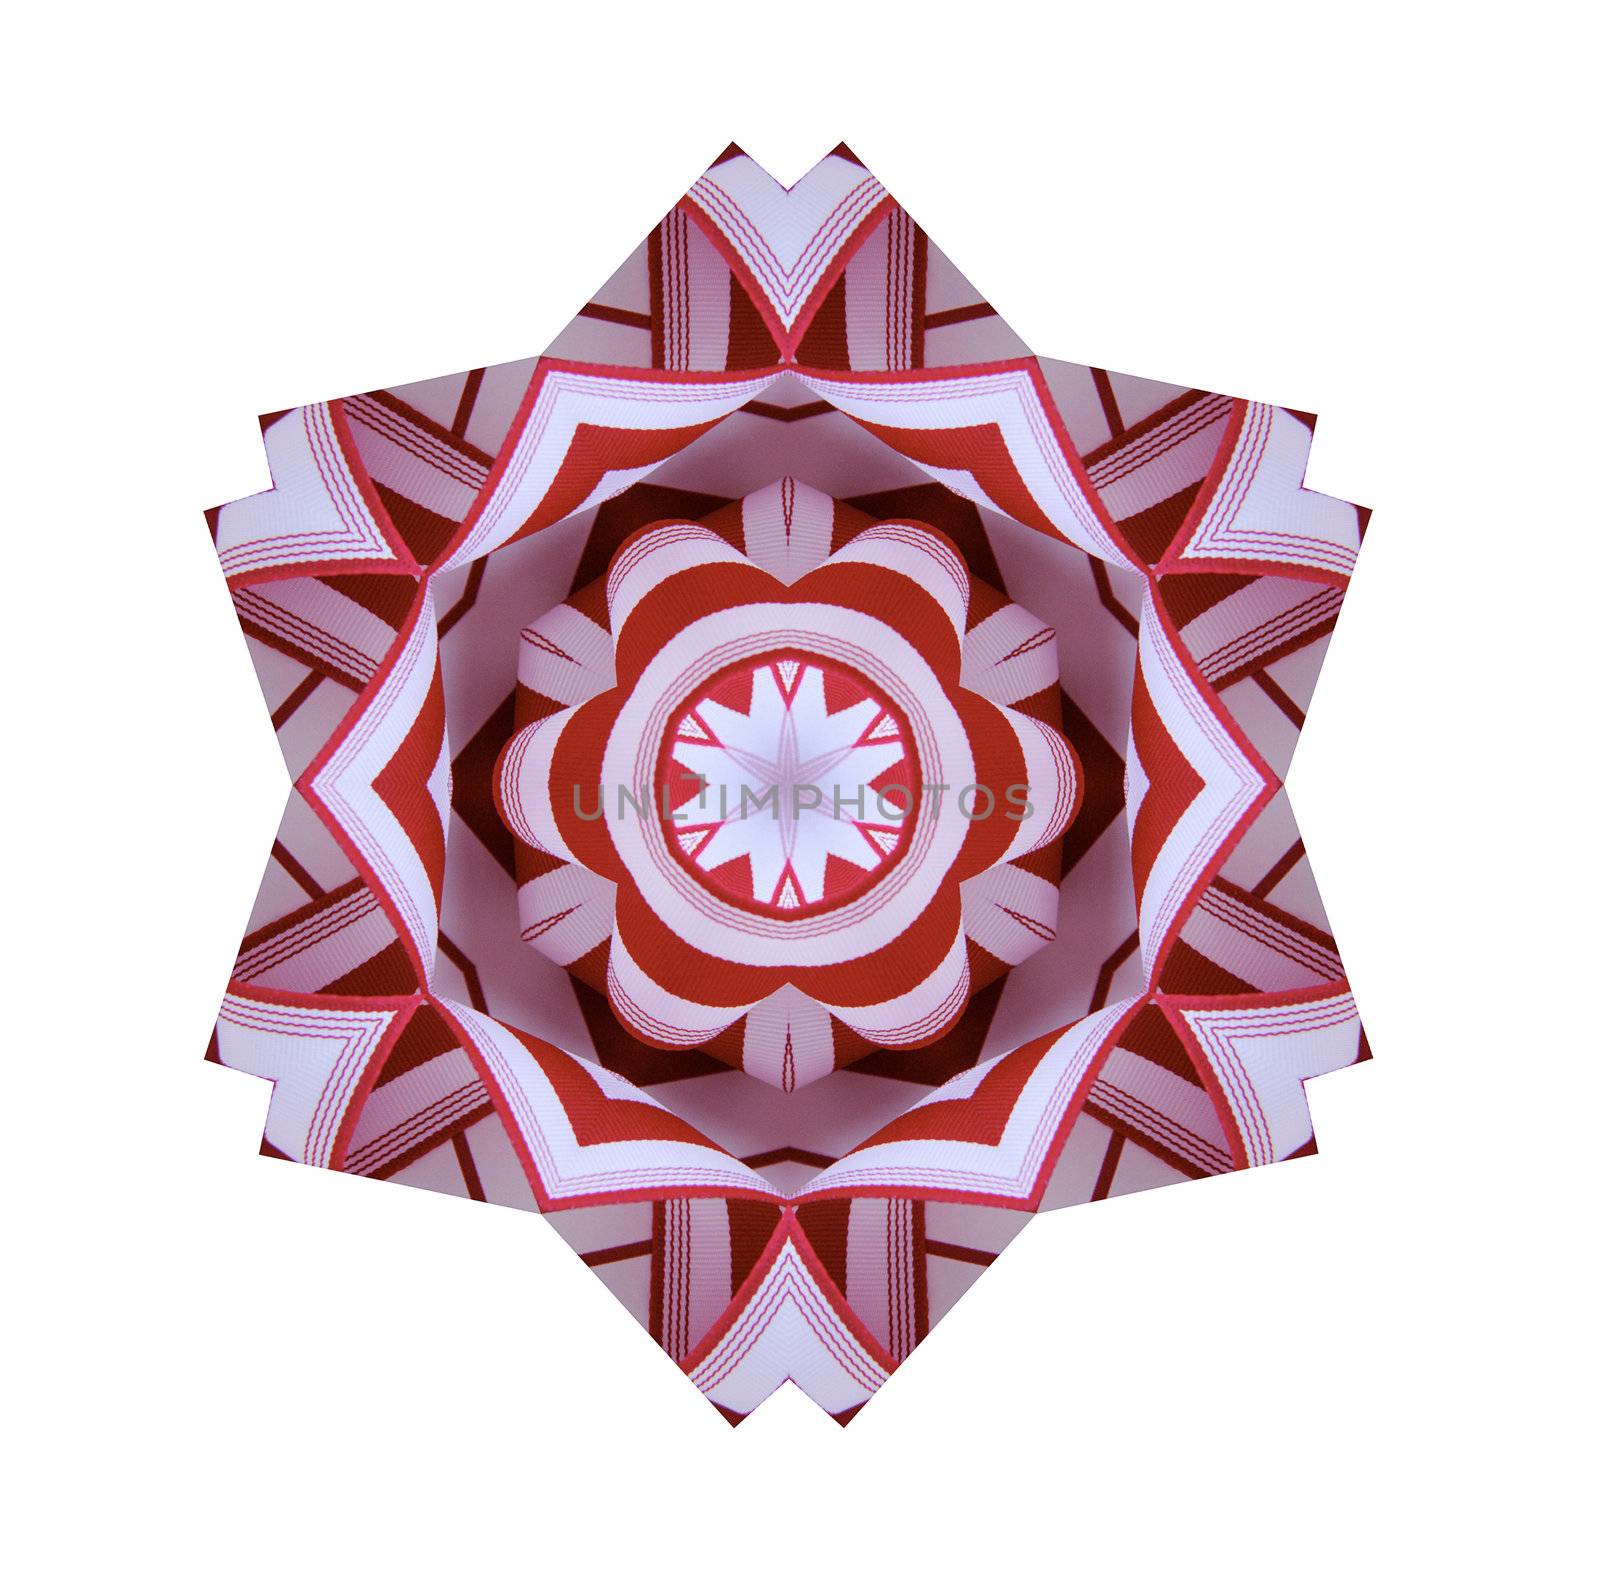 complex symmetrical design using red and white candy cane stripes